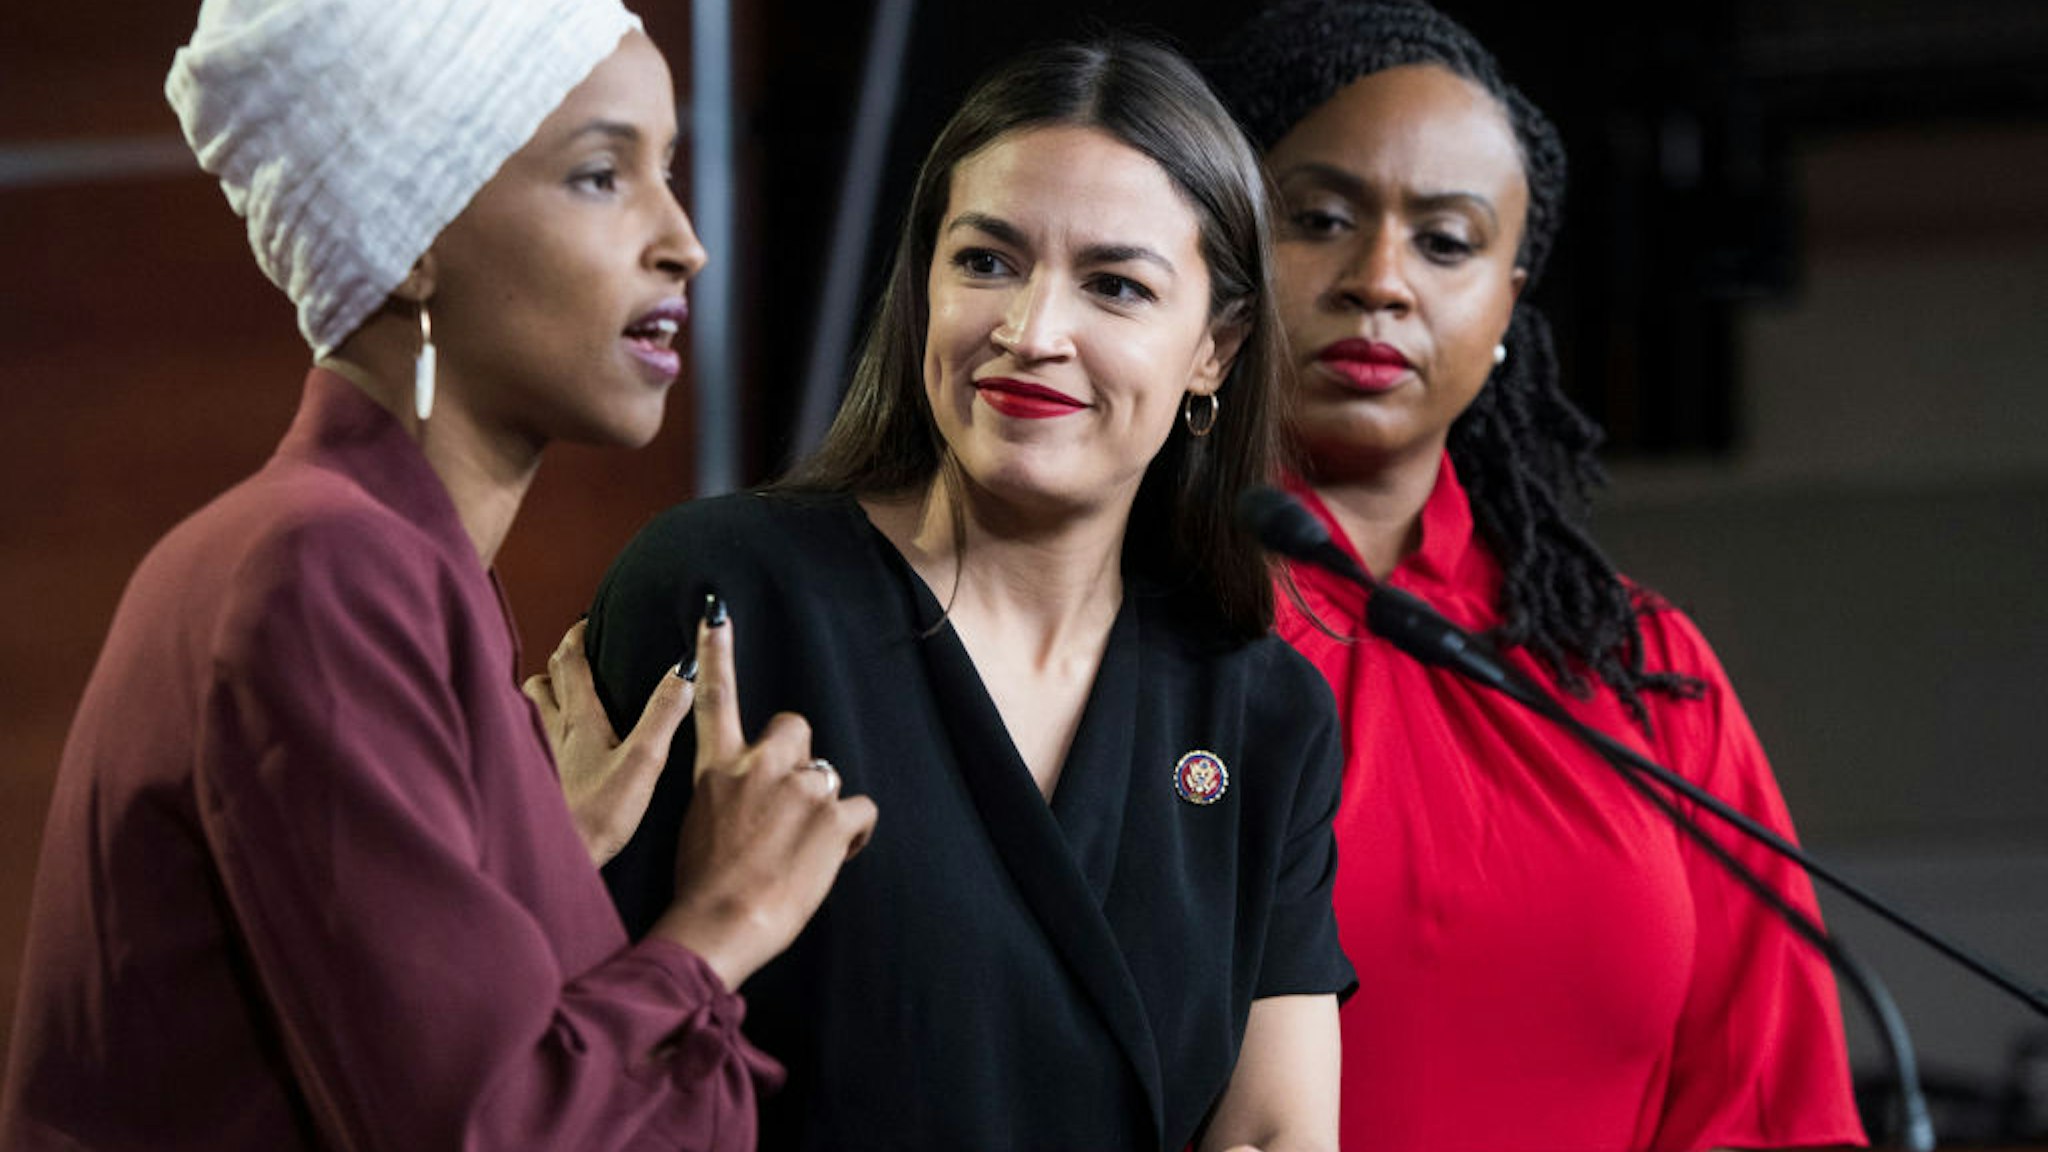 From left, Reps. Ilhan Omar, D-Minn., Alexandria Ocasio-Cortez, D-N.Y., and Ayanna Pressley, D-Mass., conduct a news conference in the Capitol Visitor Center responding to negative comments by President Trump that were directed at the freshmen House Democrats on Monday, July 15, 2019.